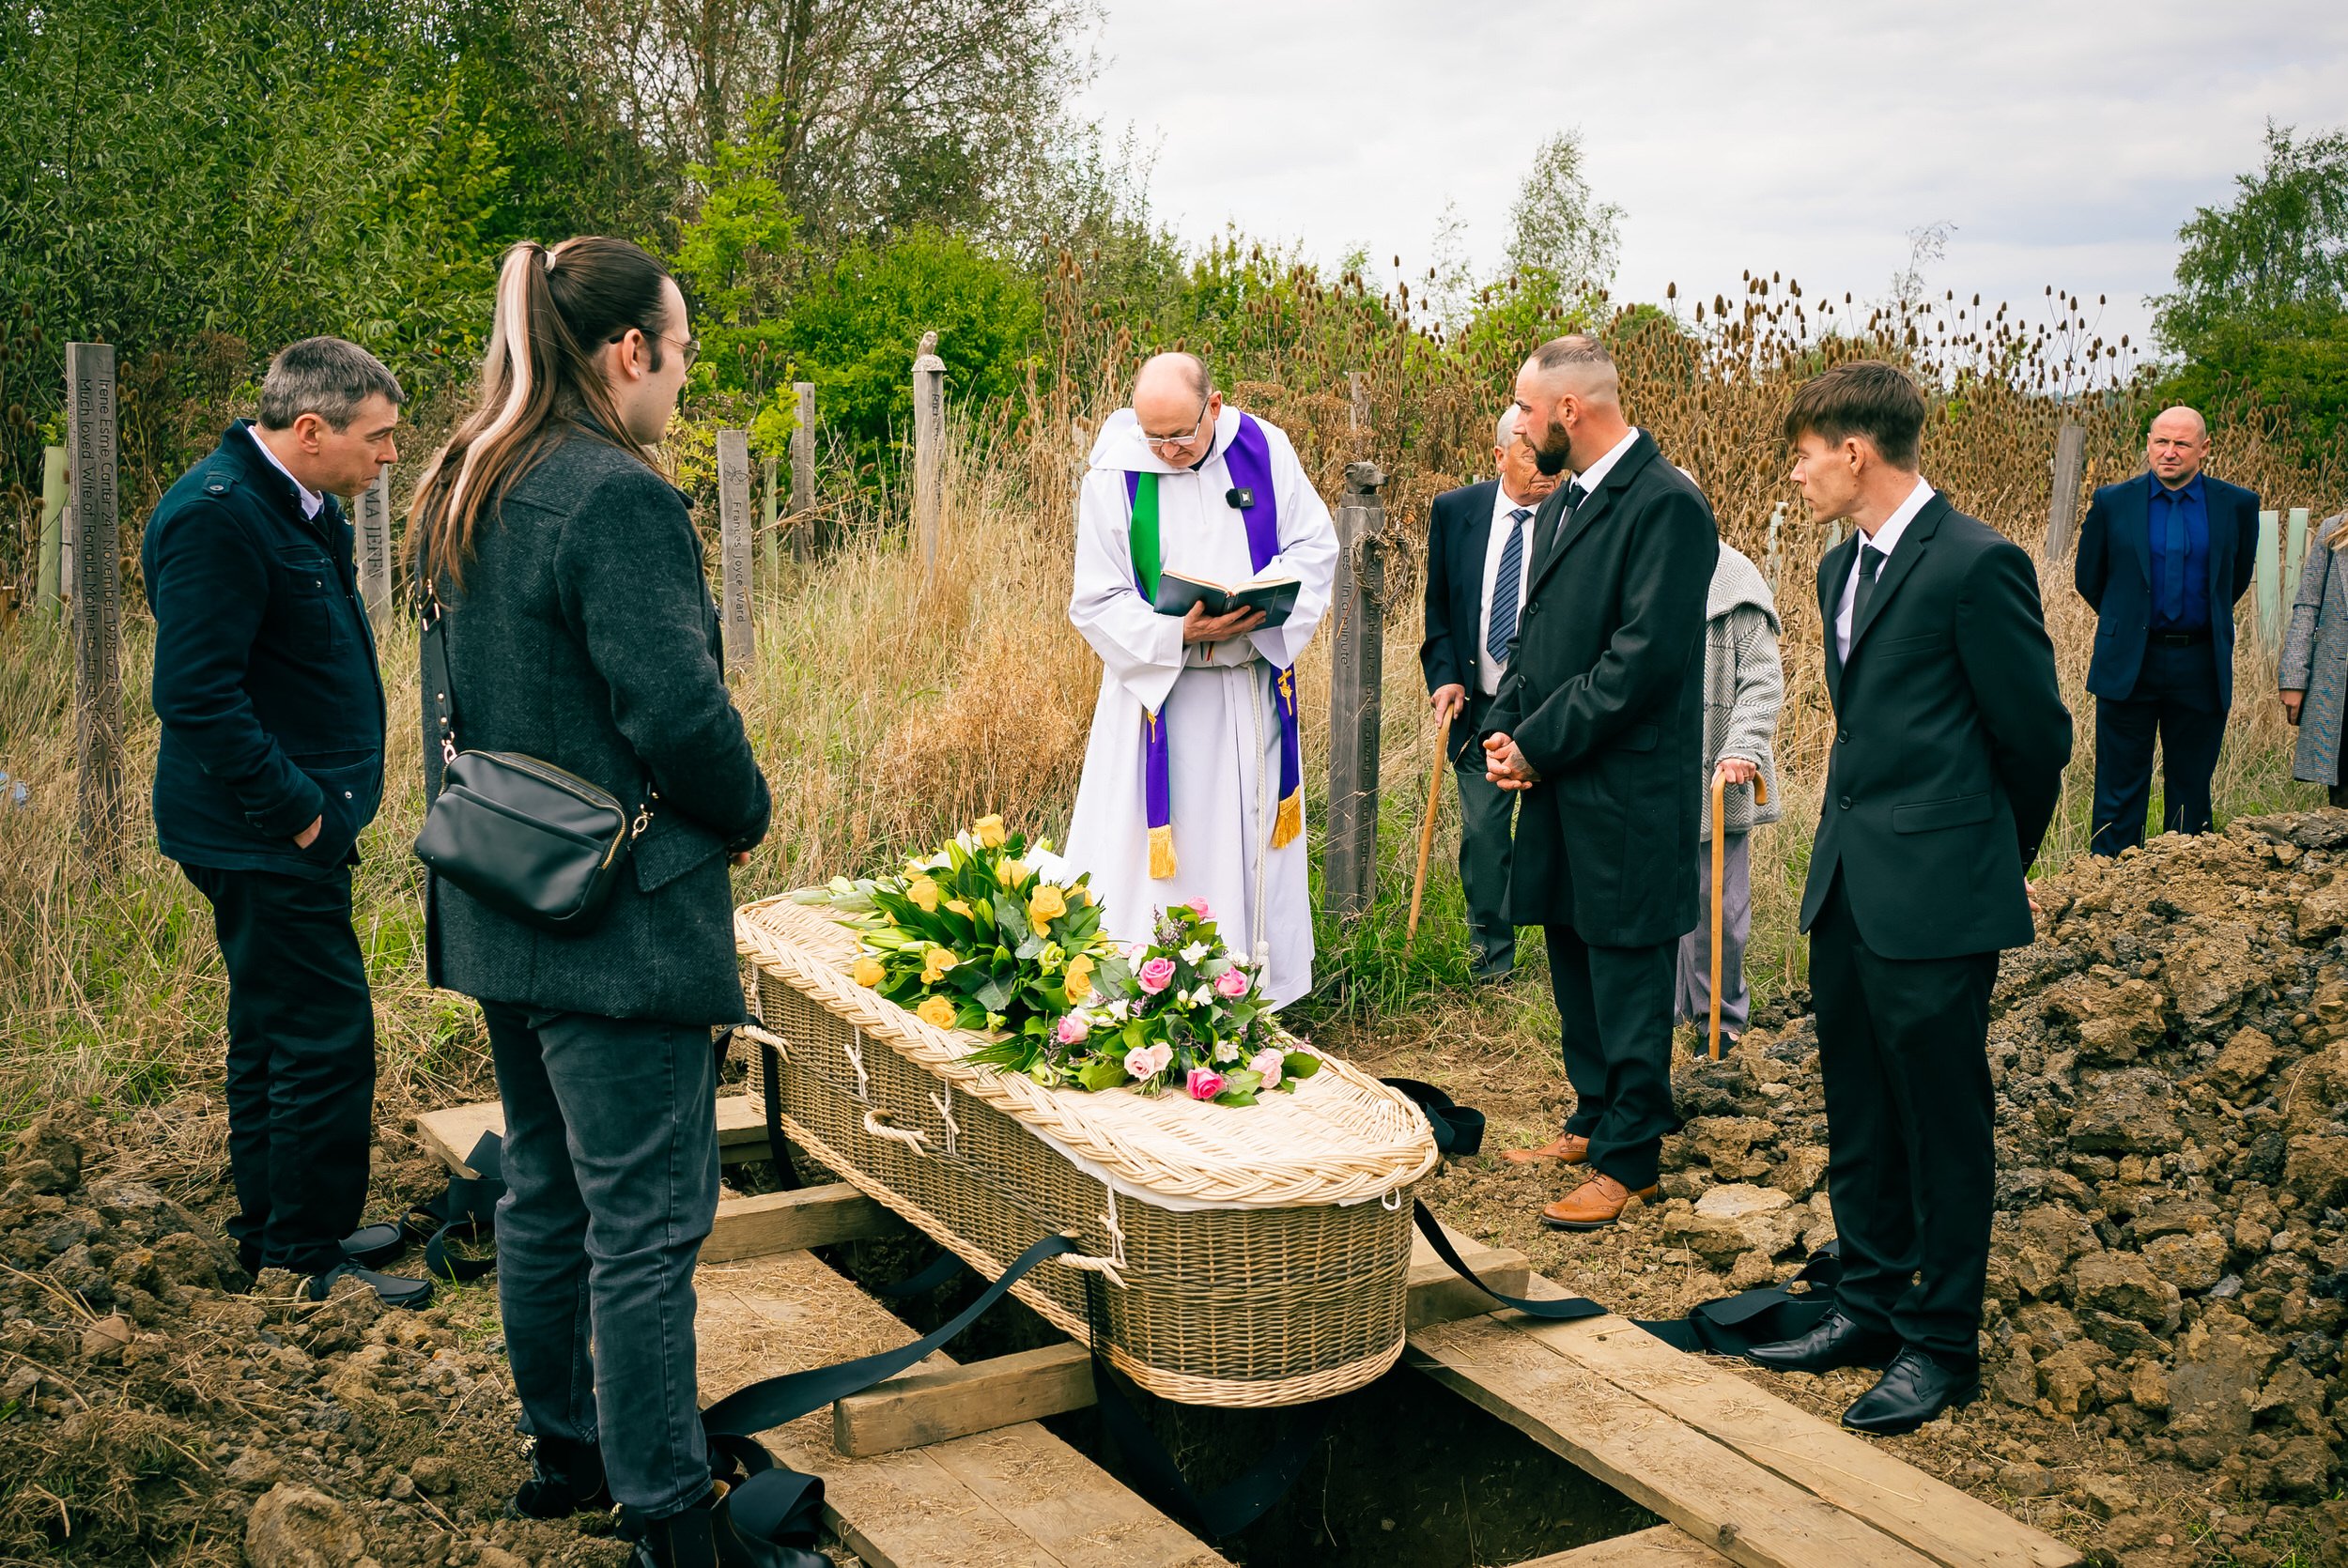 UK Funeral Streaming & Funeral Photographers